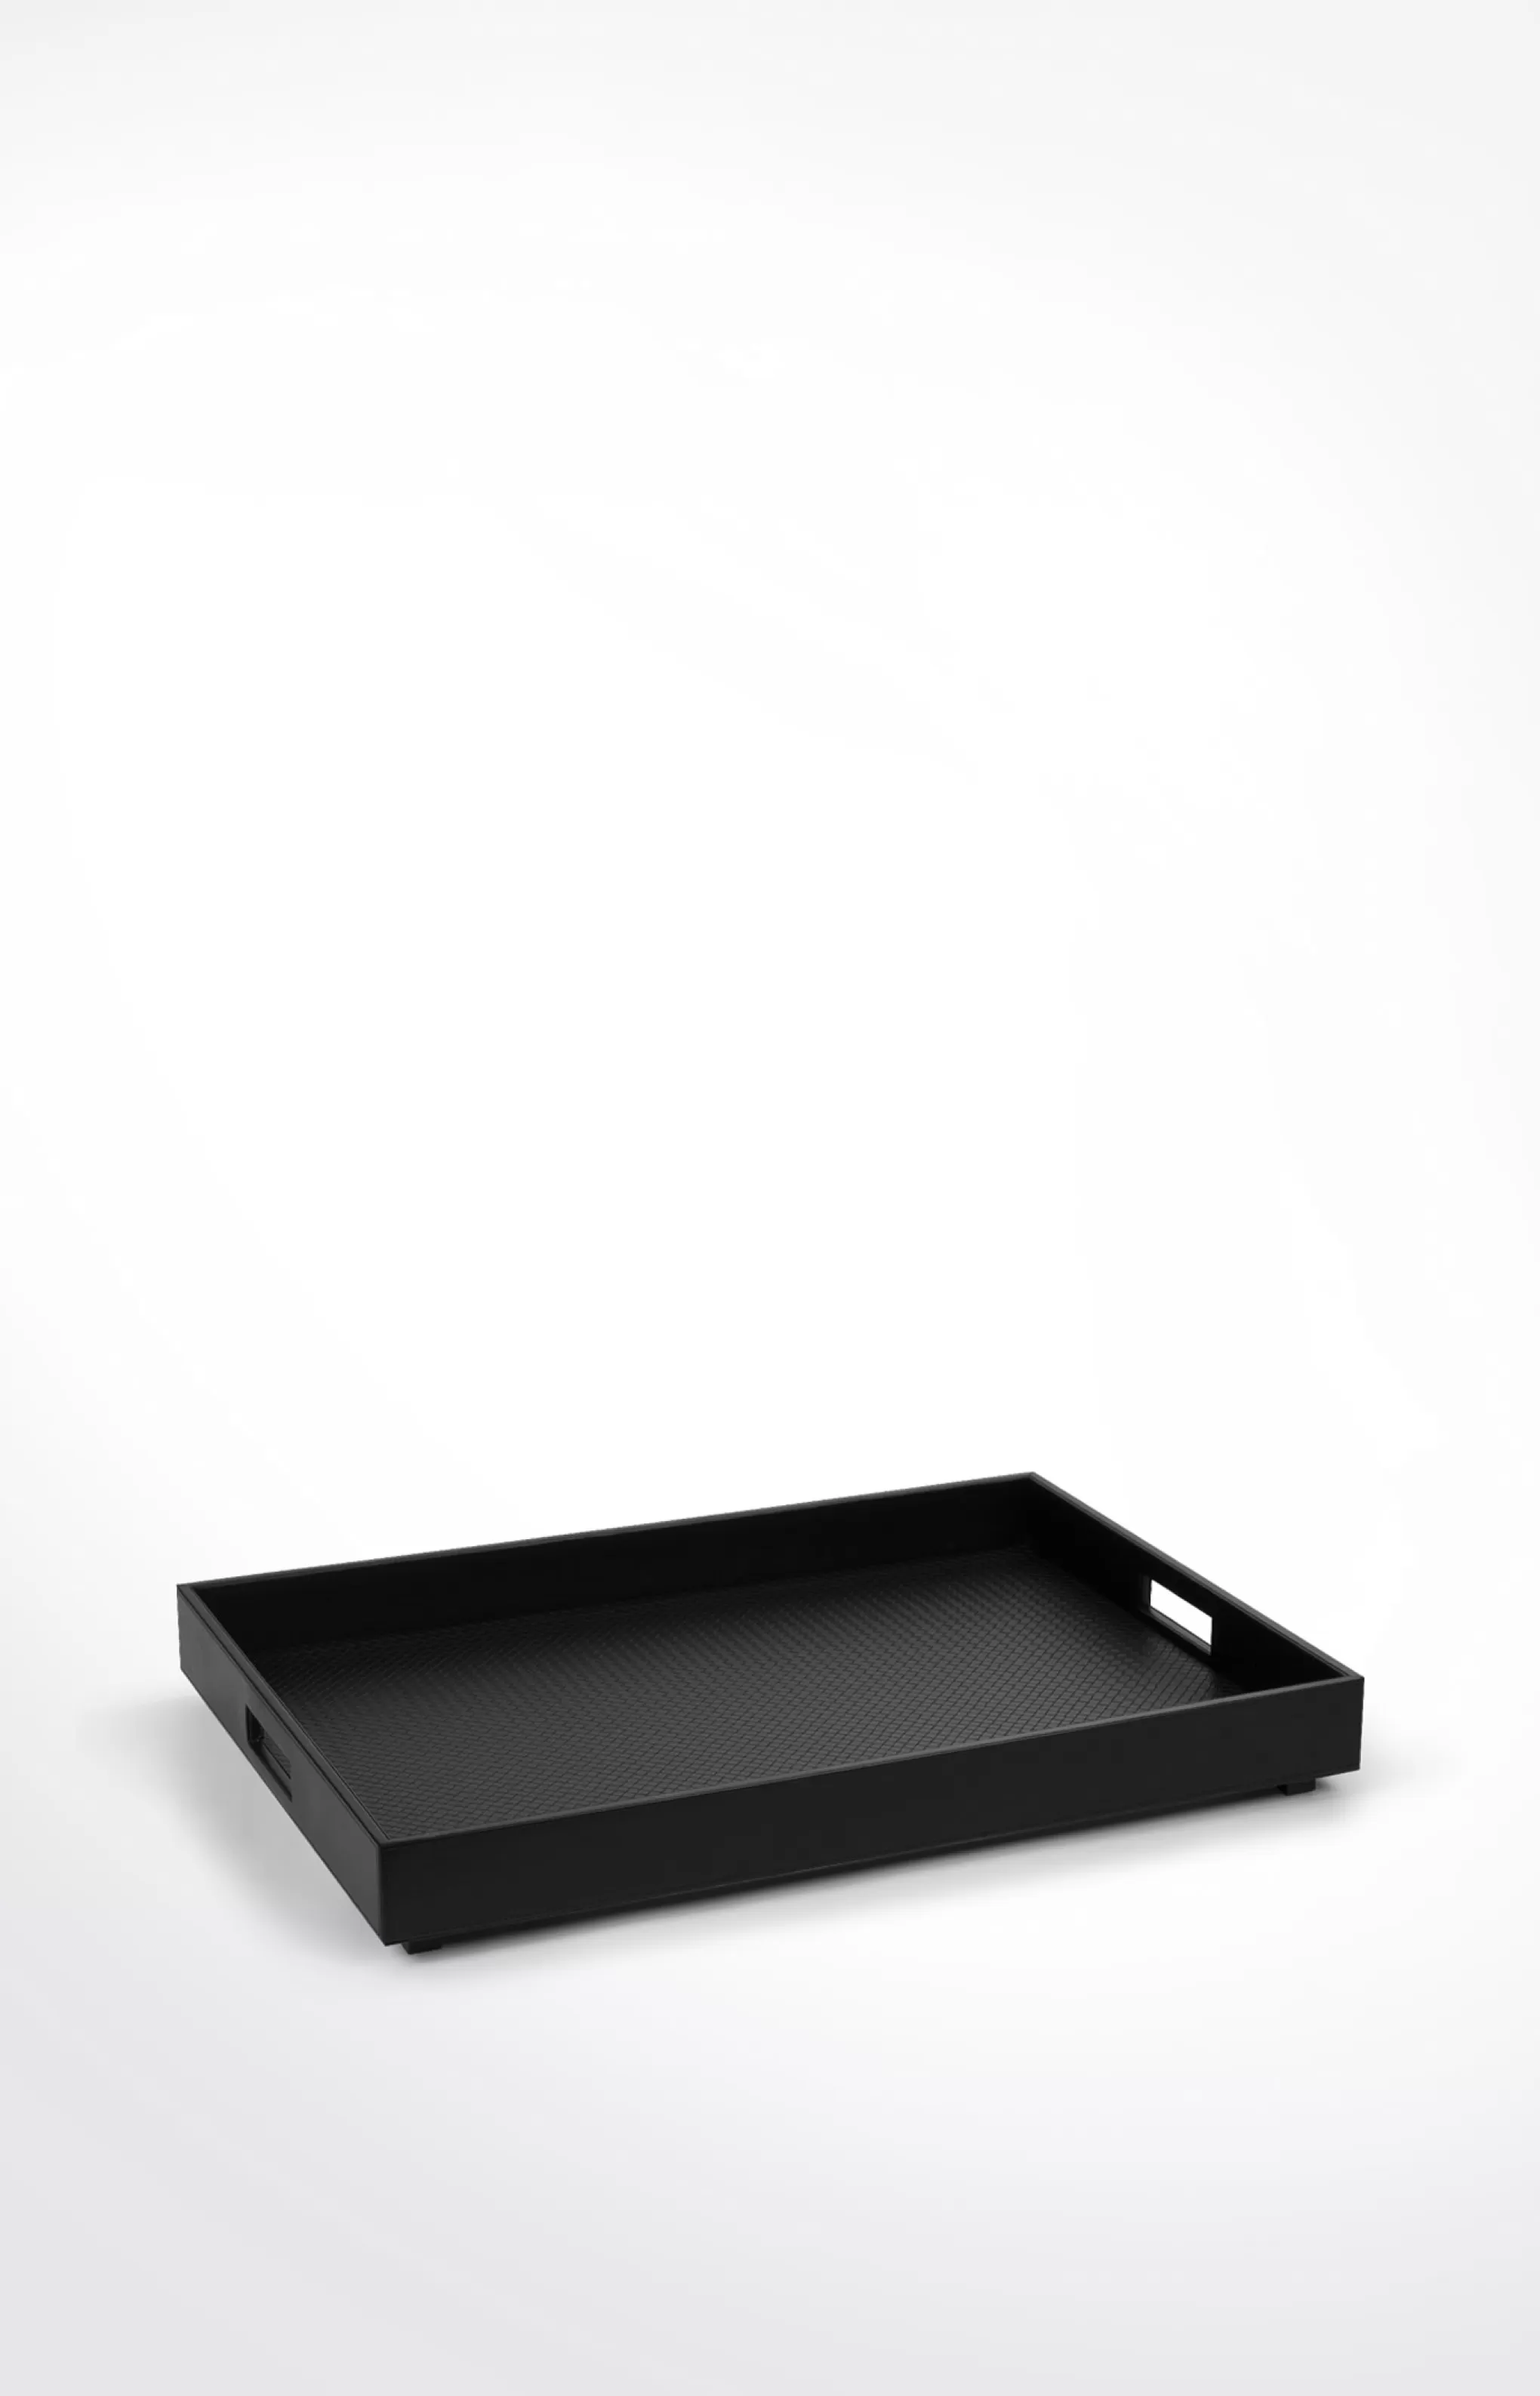 Bathroom Accessories | Discover Everything | Home Accessories | Table Accessories*JOOP Bathroom Accessories | Discover Everything | Home Accessories | Table Accessories Large Homeline tray, black